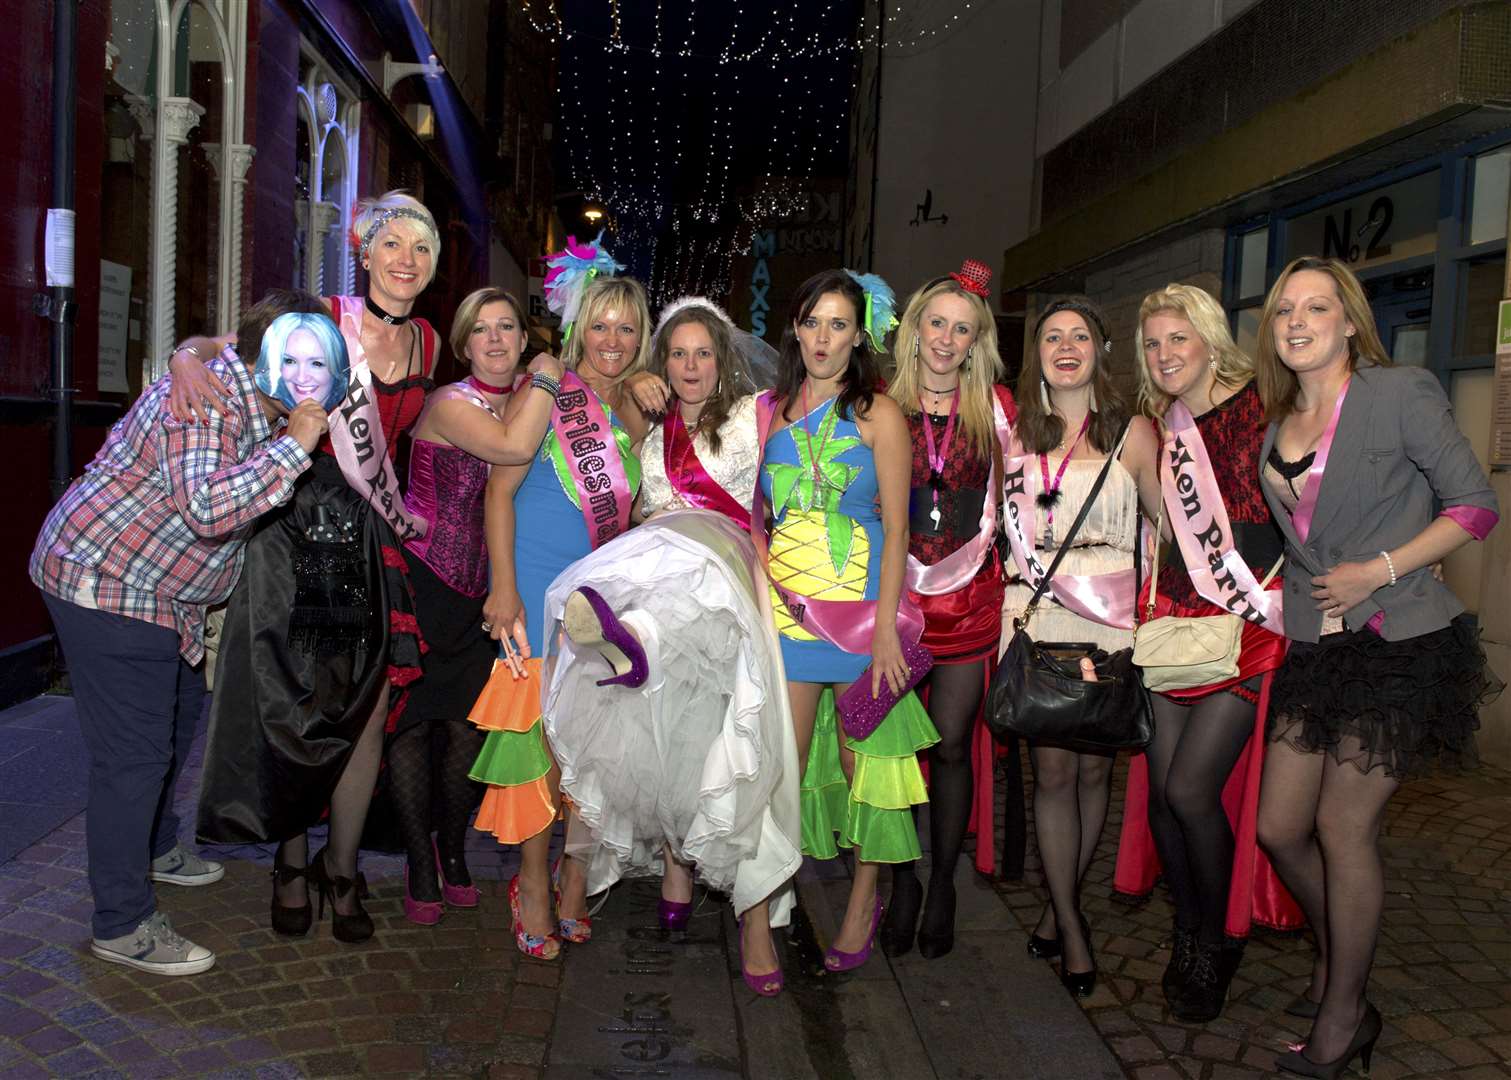 On her hen night with her hens is Marie Grant (centre, white dress). Picture: Callum Mackay. Image No. 019214.